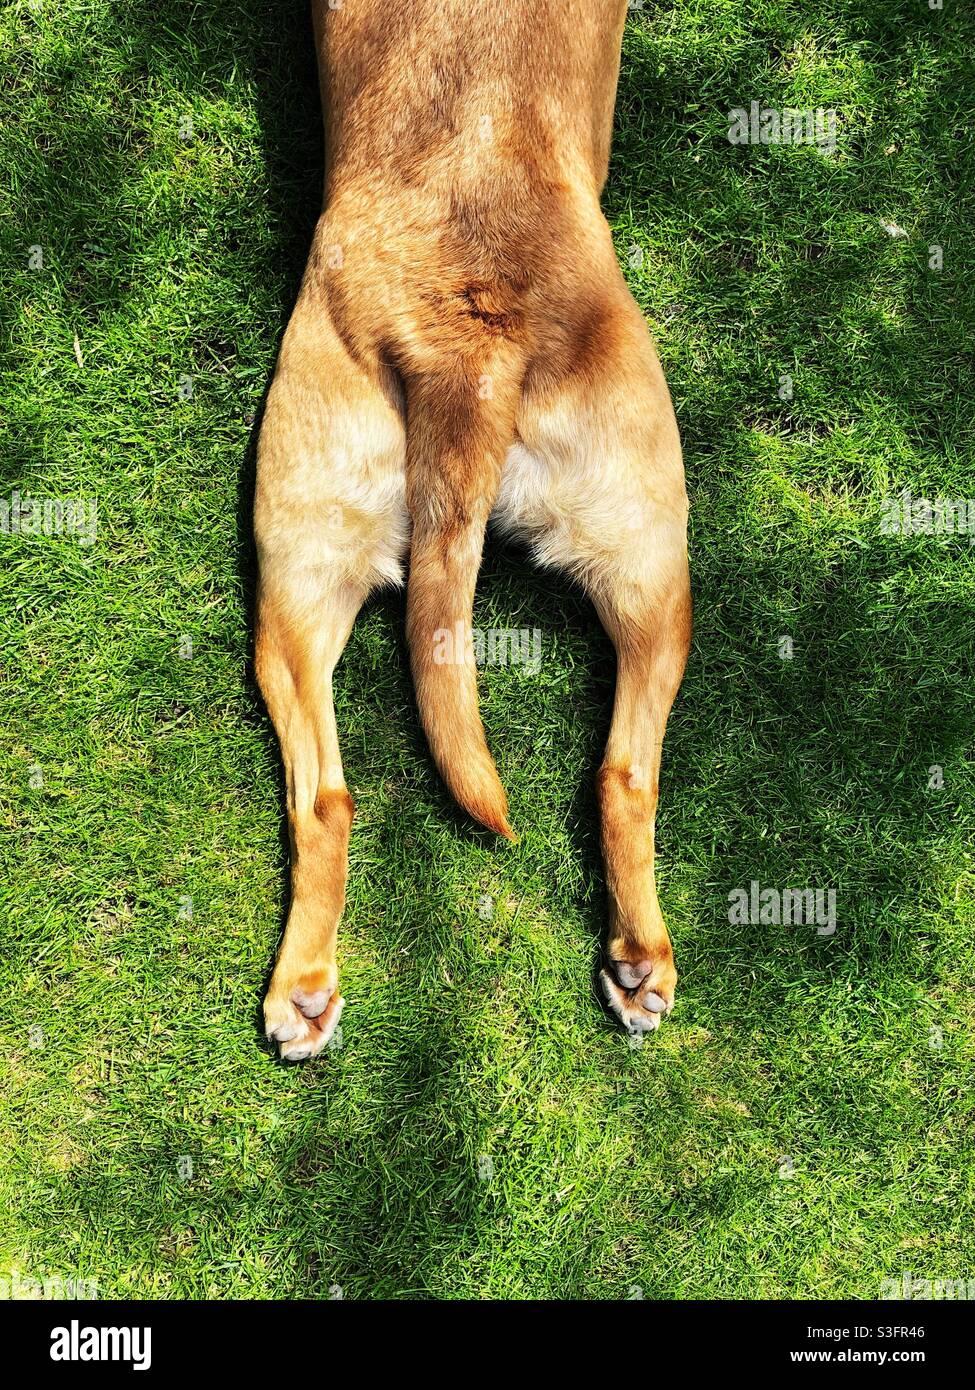 The hind legs of a pet labrador dog outstretched on green grass in a sploot position Stock Photo